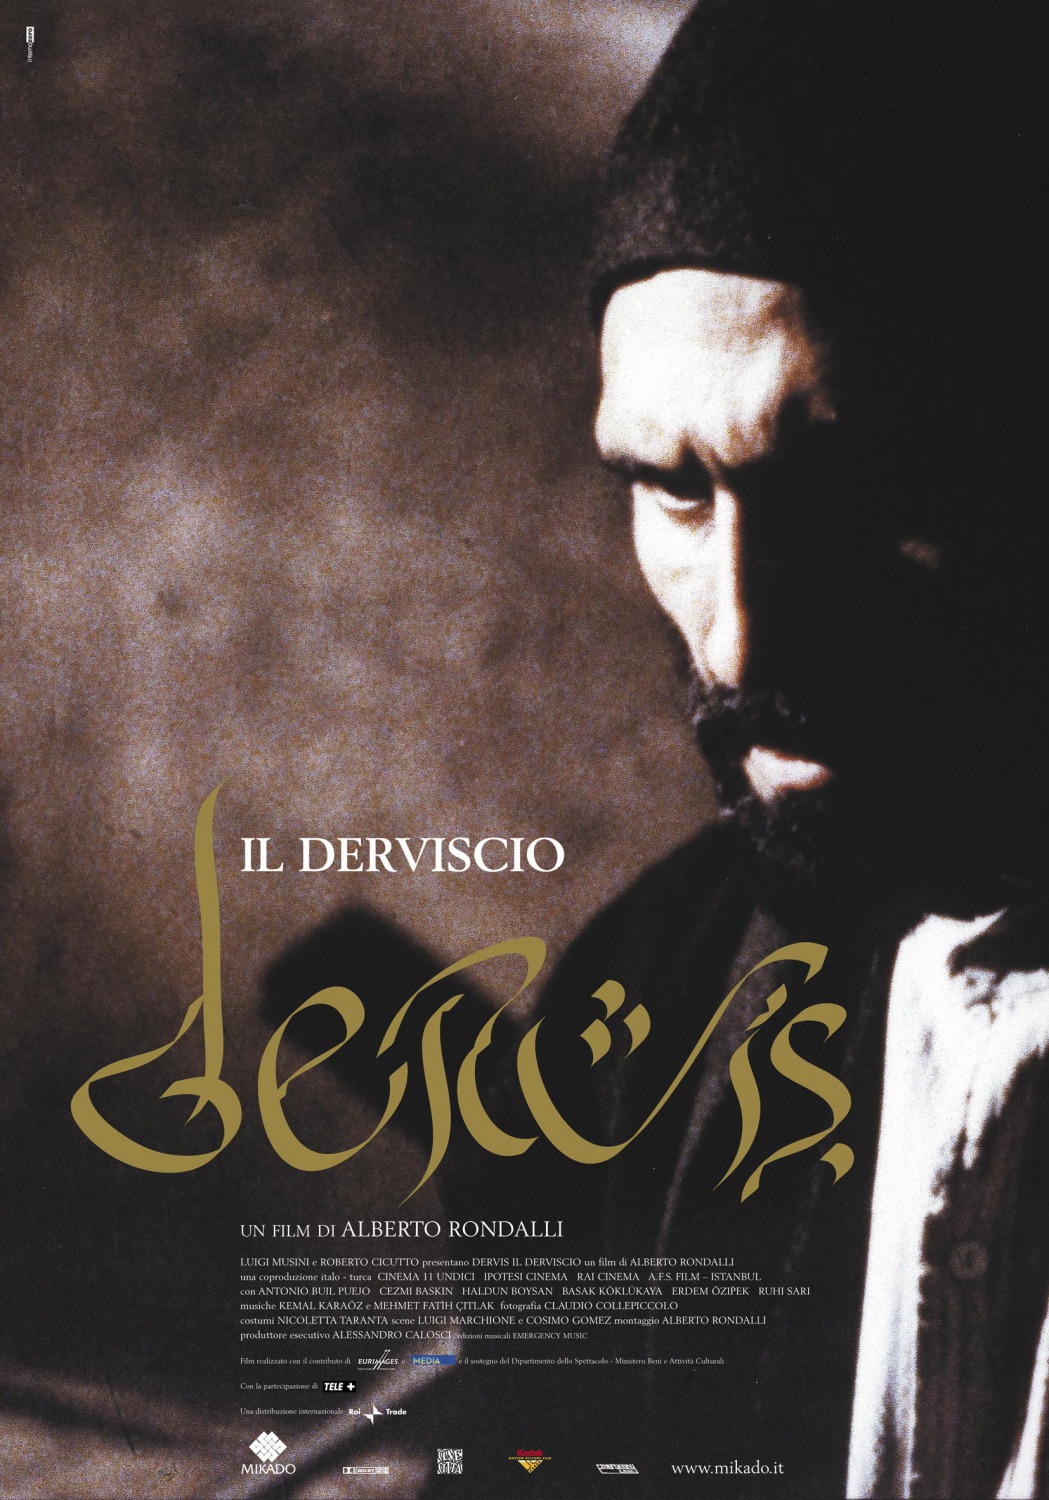 Extra Large Movie Poster Image for Il derviscio 